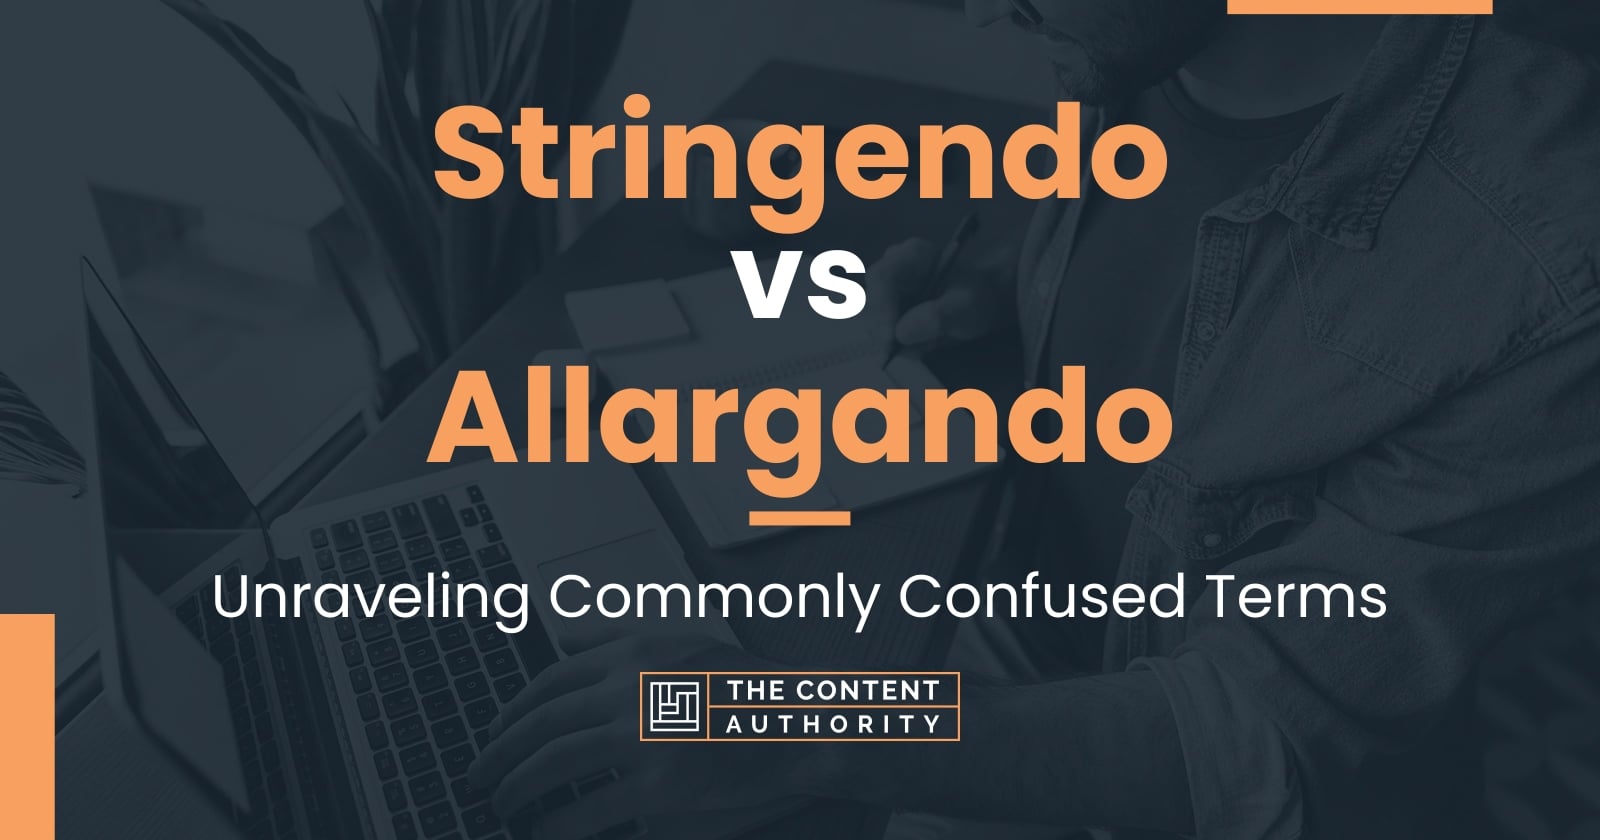 Stringendo vs Allargando: When And How Can You Use Each One?